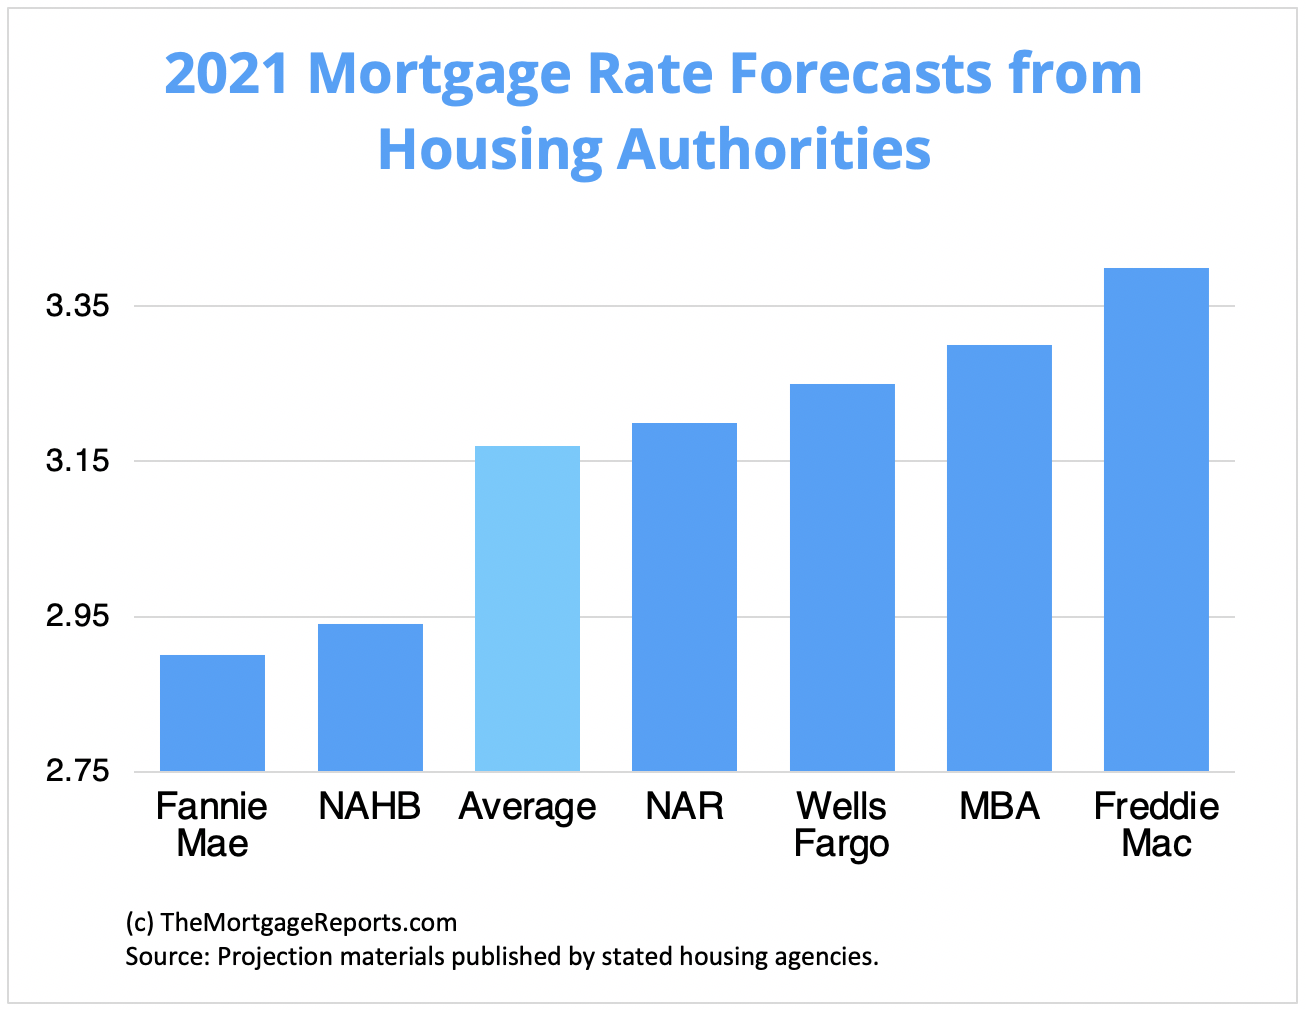 Source: The Mortgage Reports